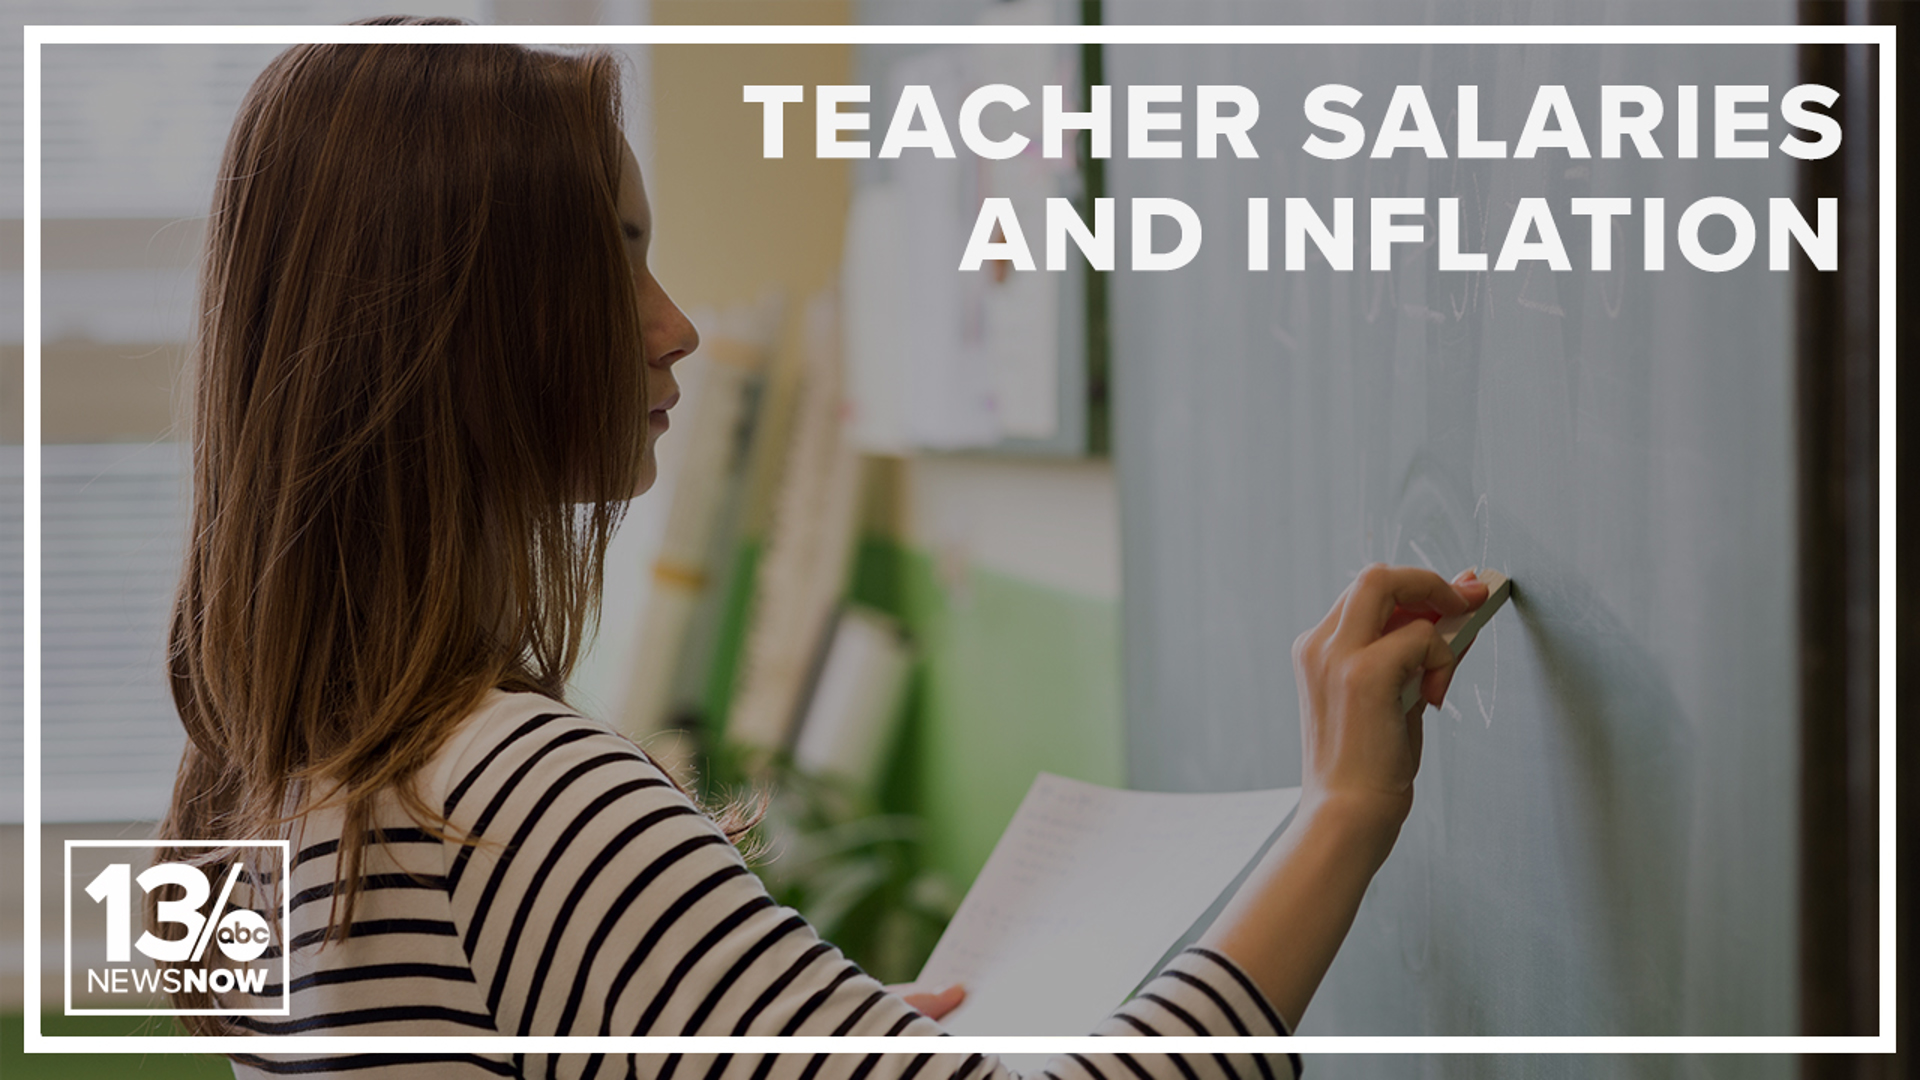 We compared starting teacher salaries in Hampton Roads between this year and last. Only one division offered a salary bump that offsets the current inflation rate.